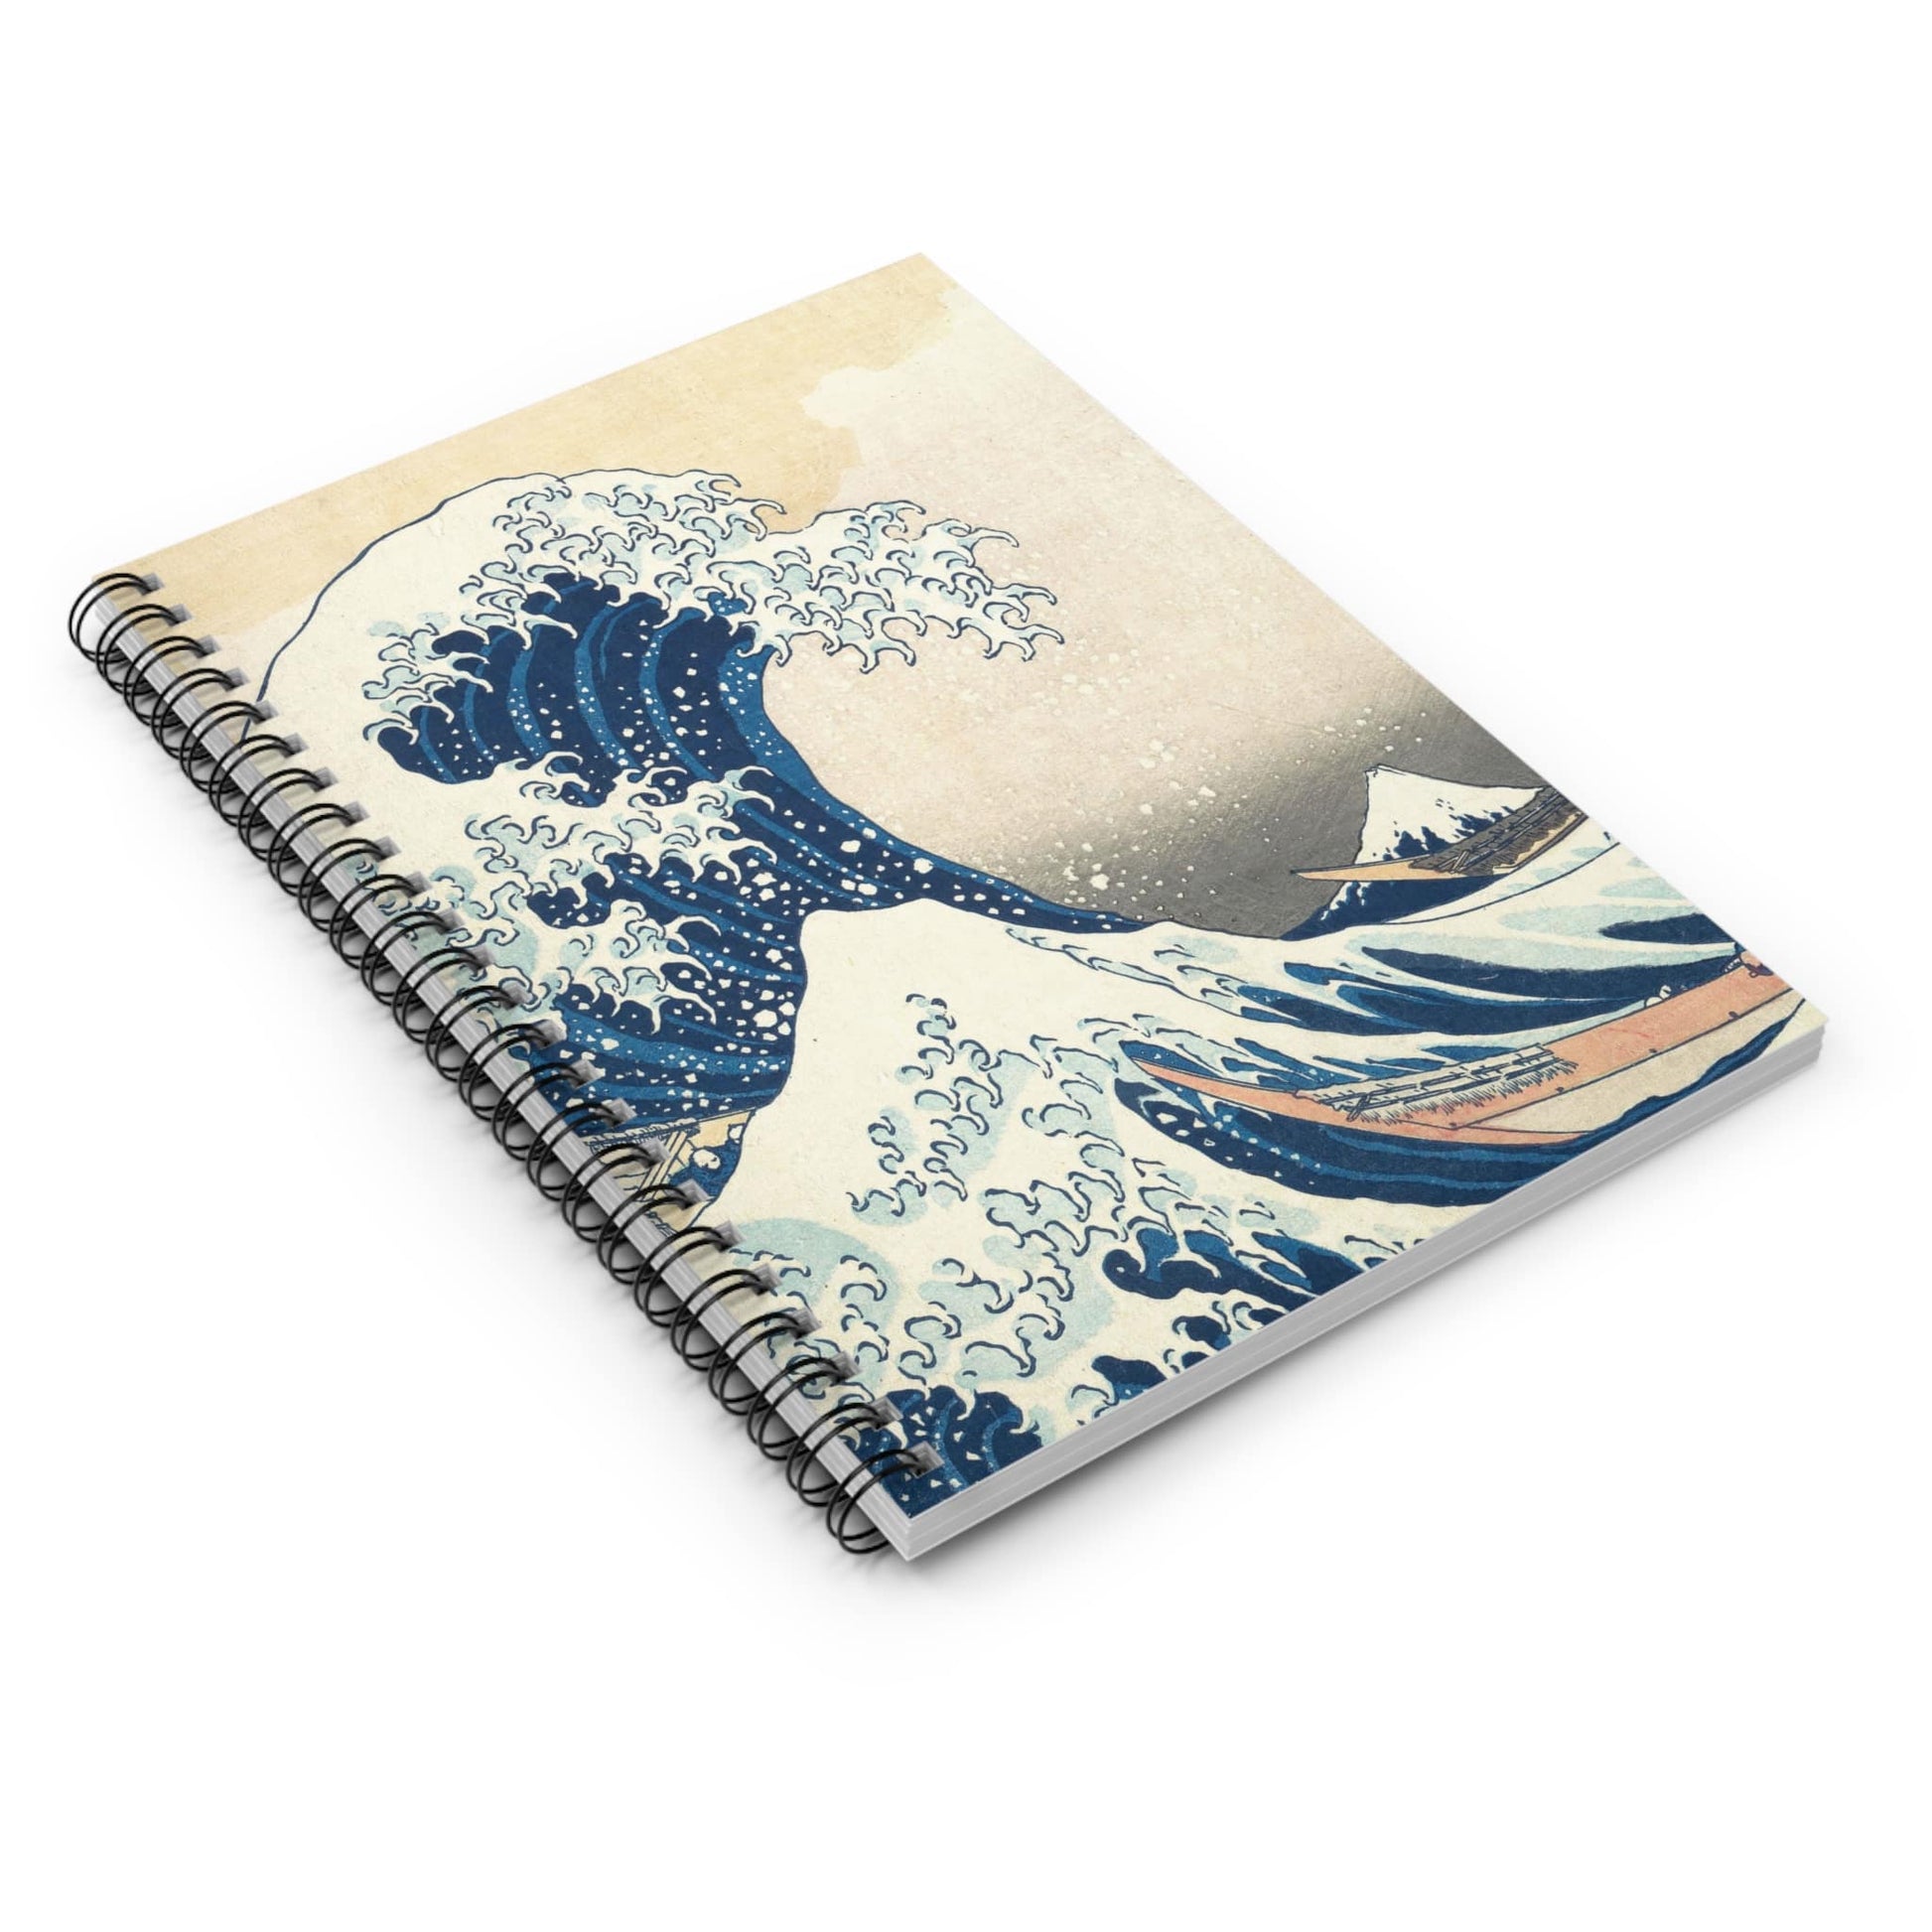 Big Wave Spiral Notebook Laying Flat on White Surface